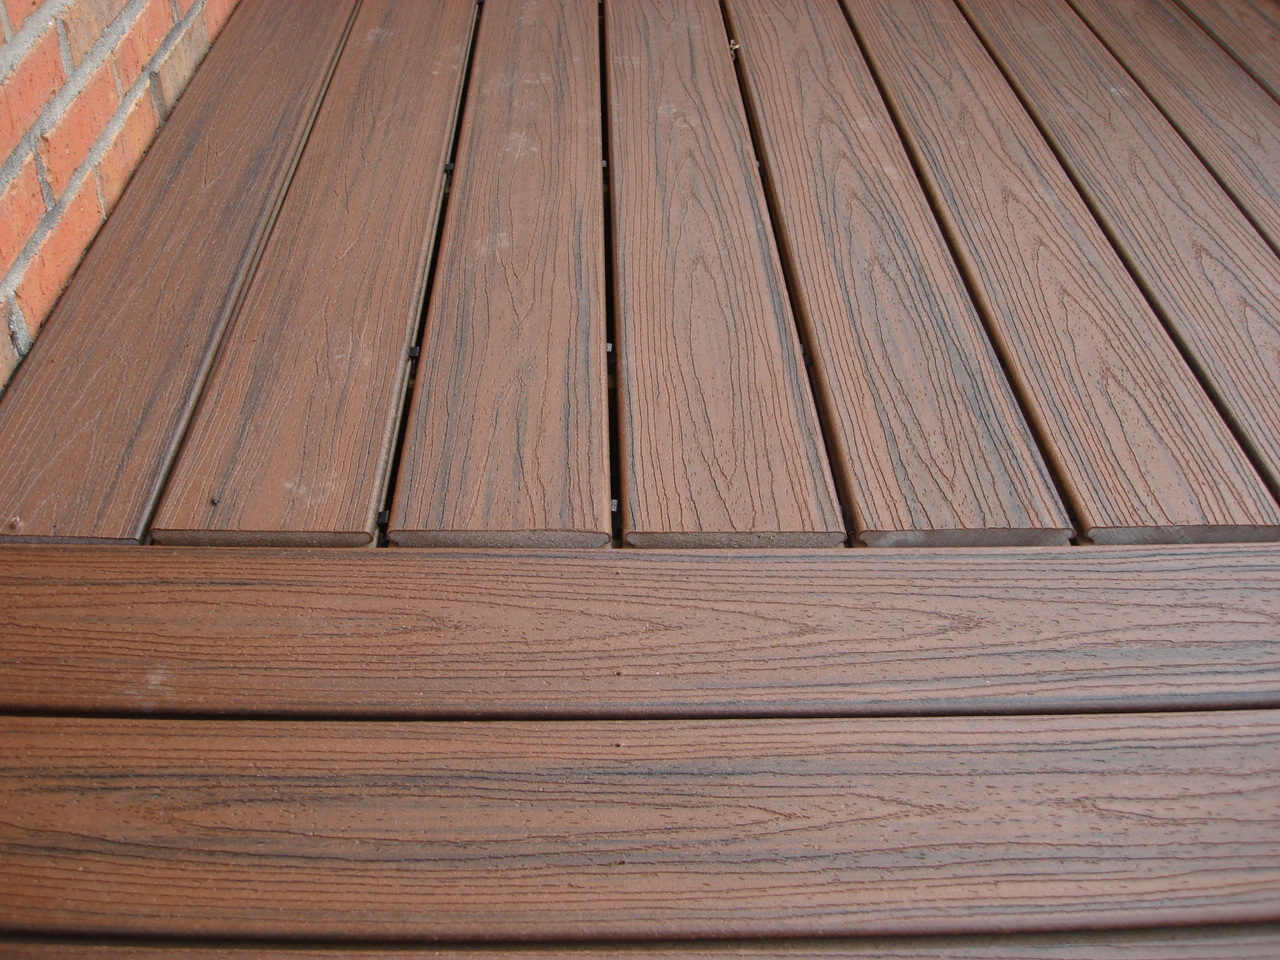 Composite Decking Fastening System Trex Deck Porch Railings intended for proportions 1280 X 960